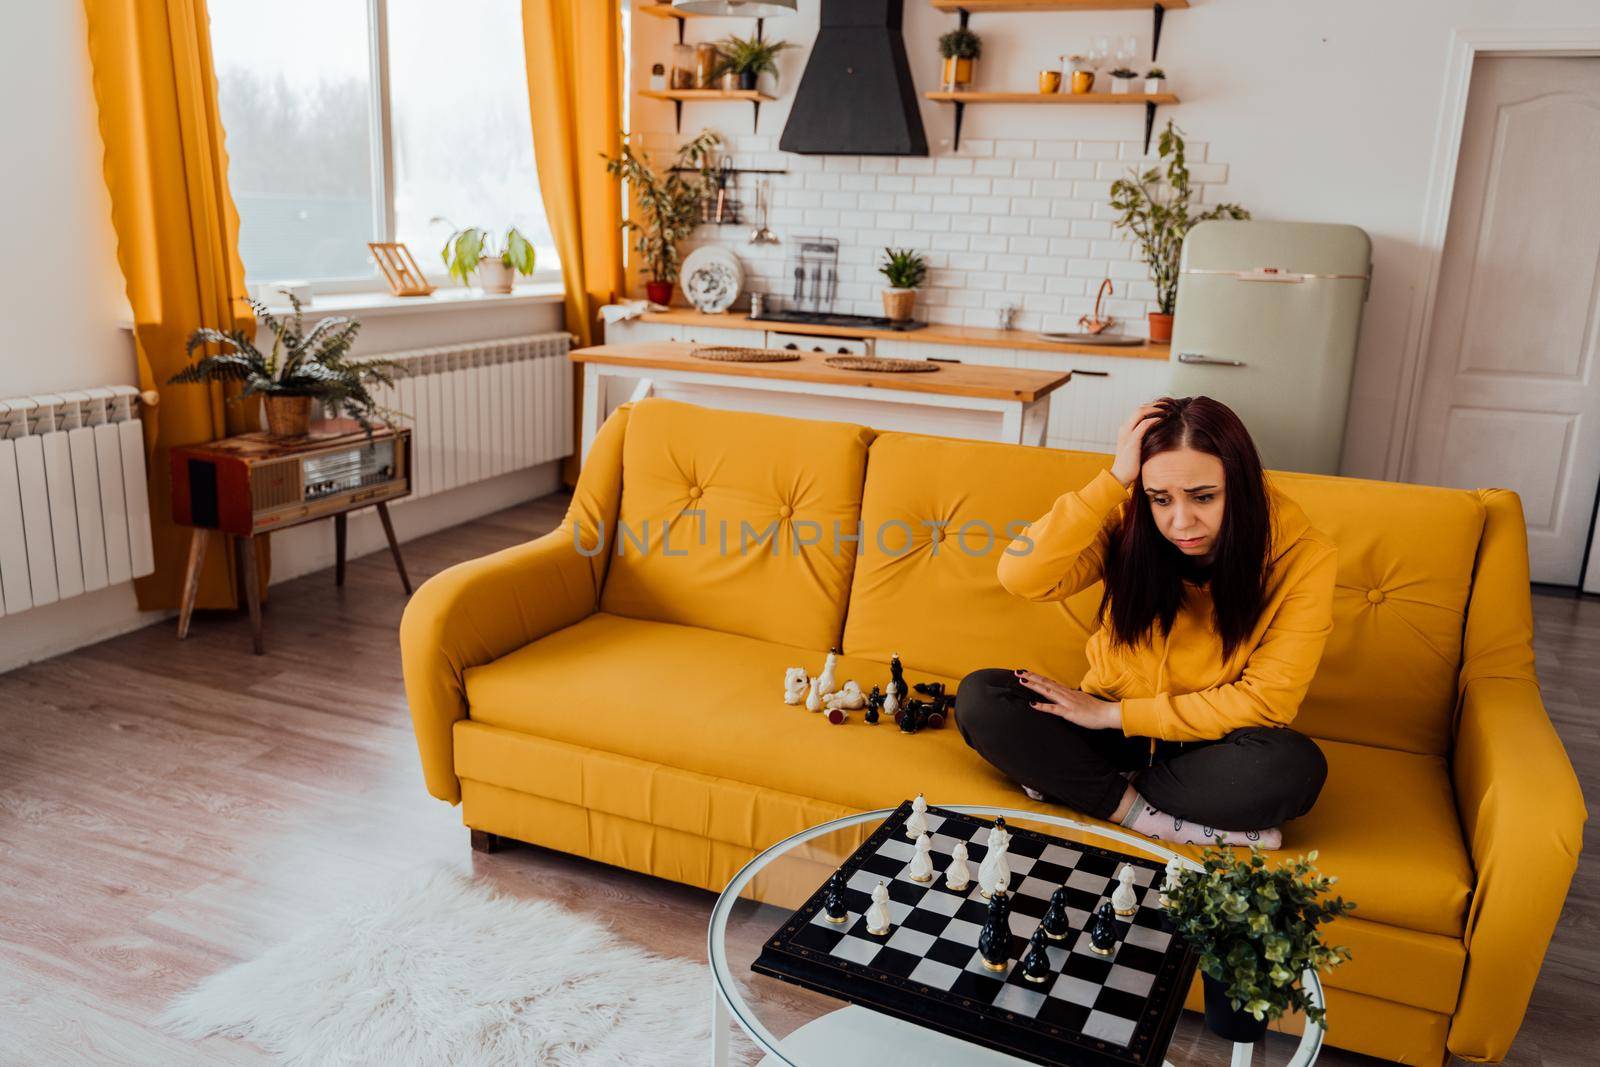 Young upset woman playing chess sitting on sofa. Distressed female plays in logical board game with herself in room. by epidemiks